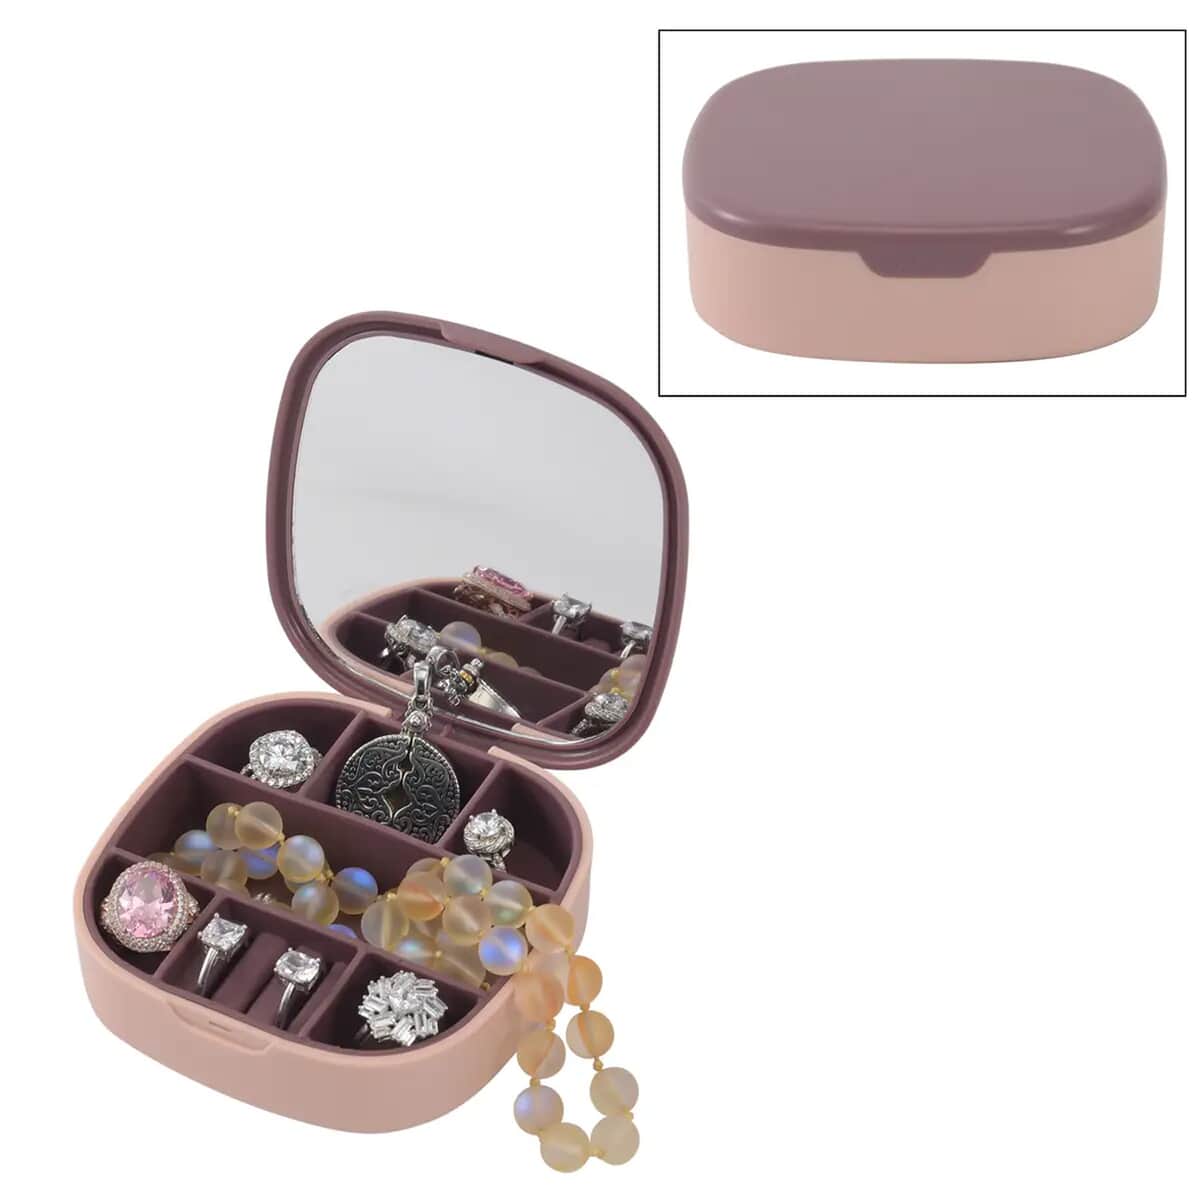 Pink Compact Jewelry Organizer with Mirror (3.94"x3.94"x1.18") image number 0